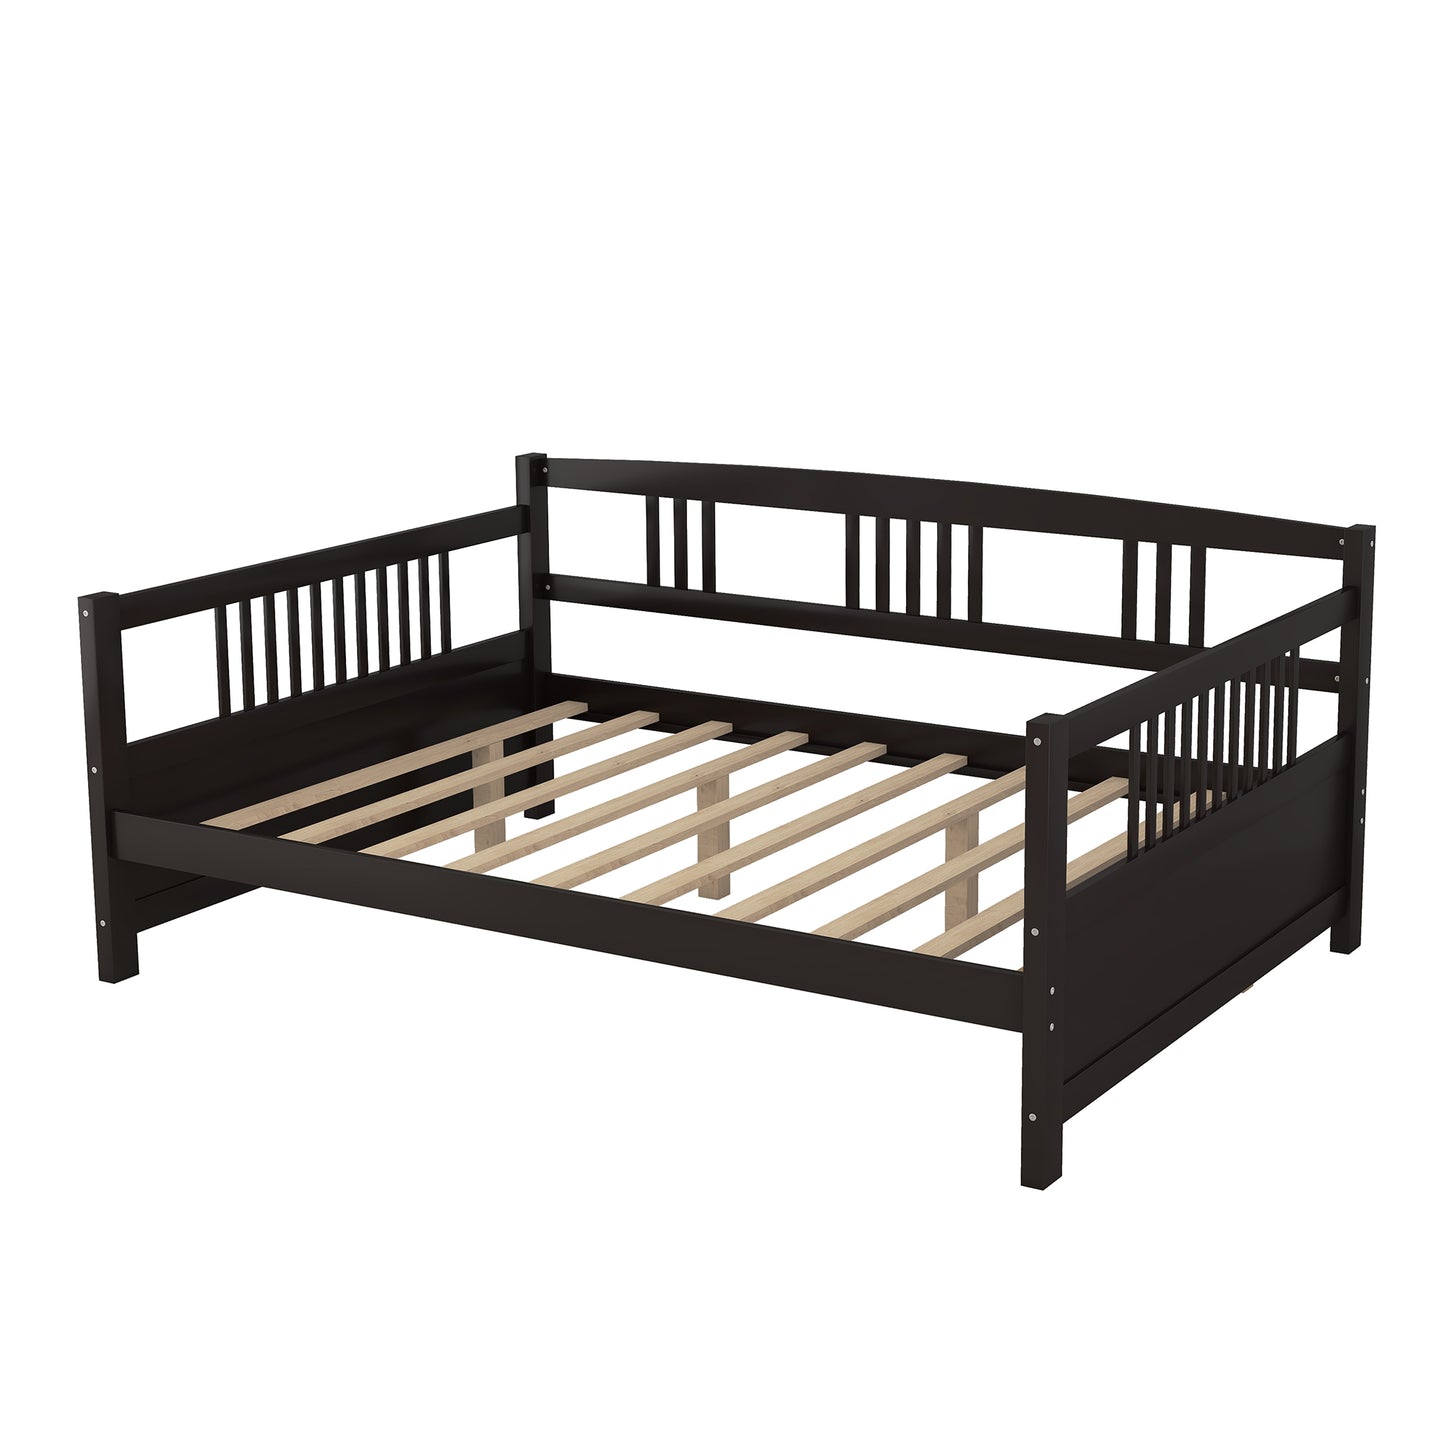 Wood Daybed Full Size Daybed with Support Legs, Espresso ( Previous SKU: WF190235AAP)